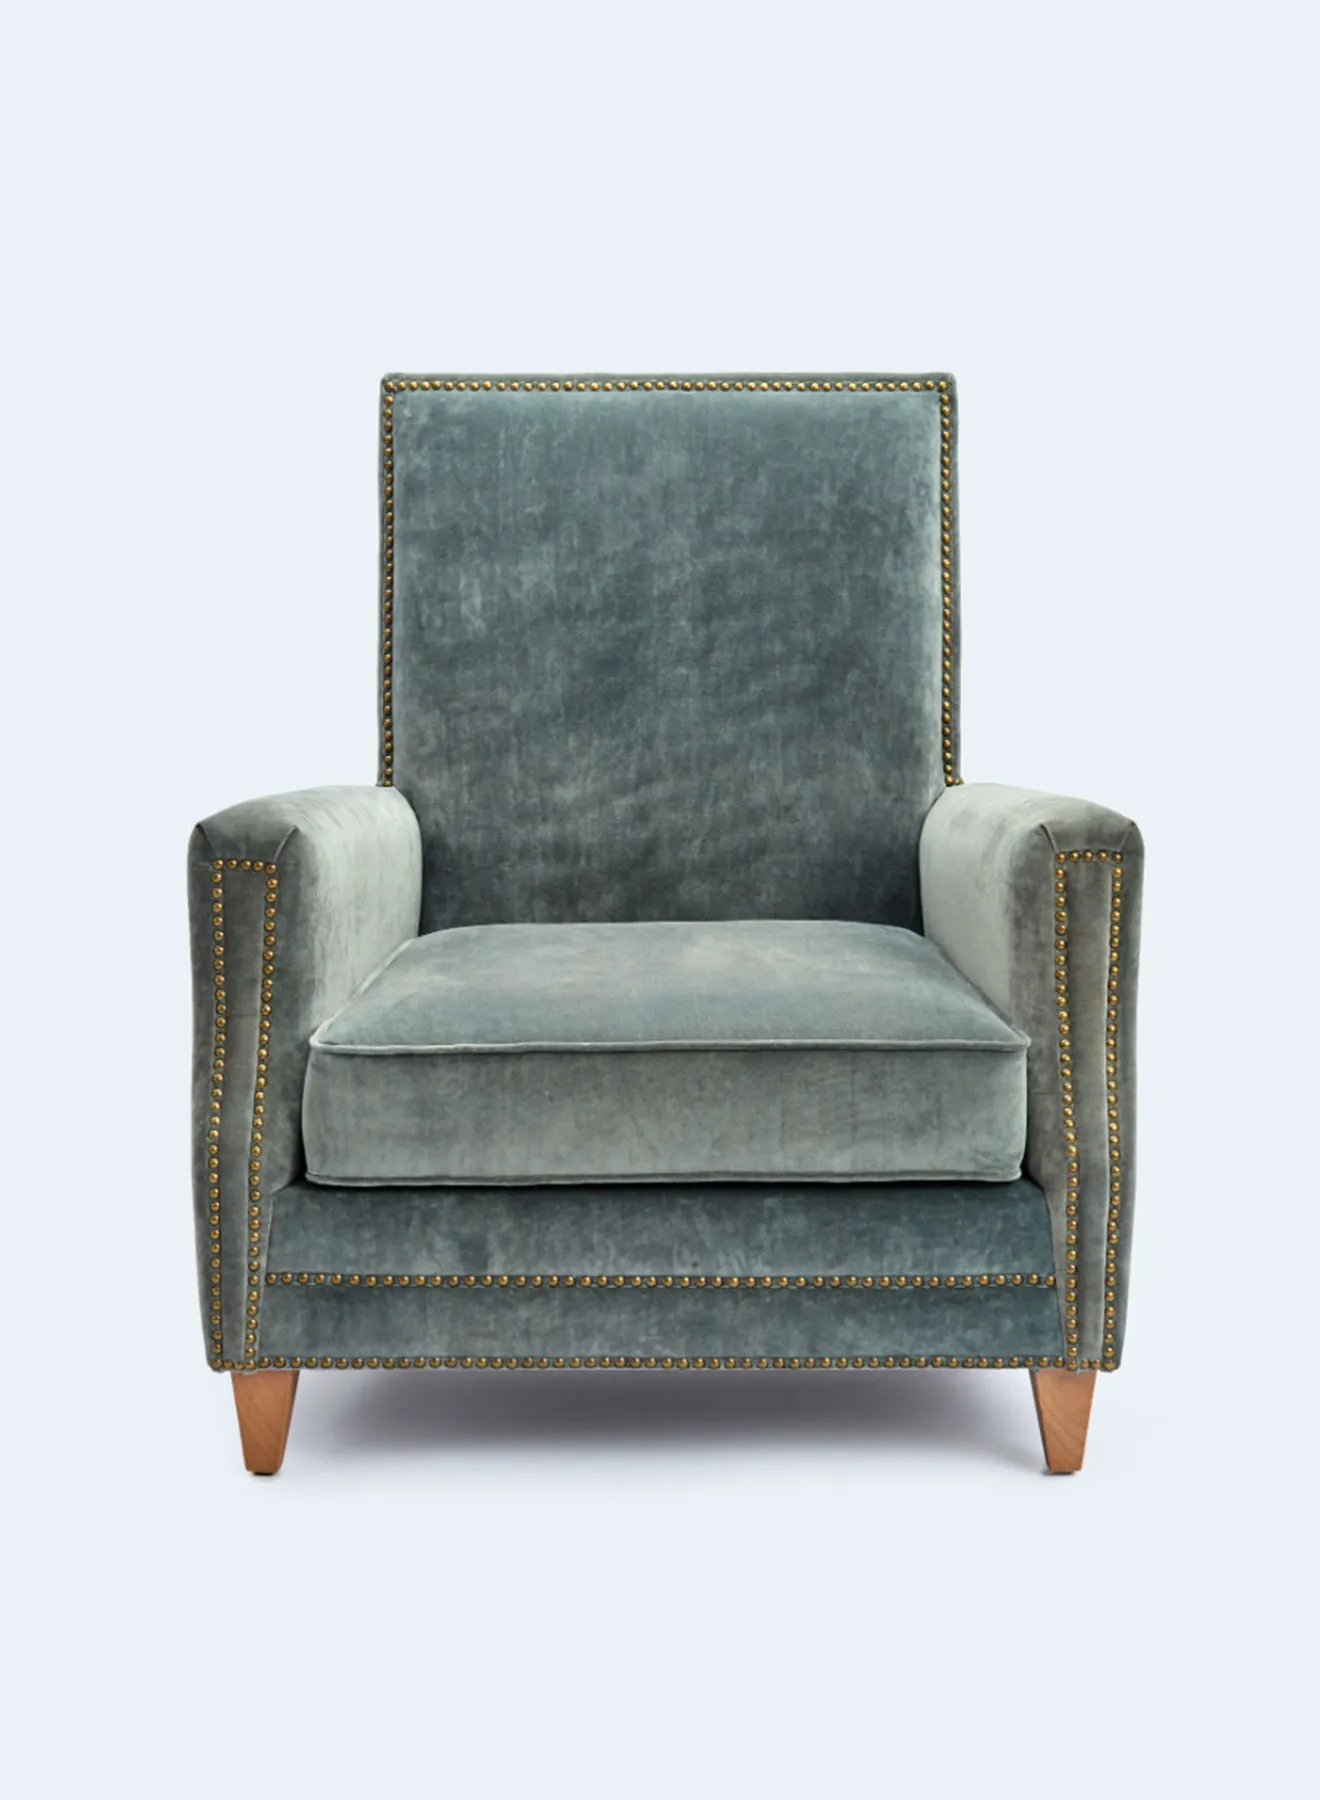 ebb & flow Armchair Luxurious - Upholstered Fabric Green/Grey Wood Couch - 910 X 910 X 990 - Relaxing Sofa